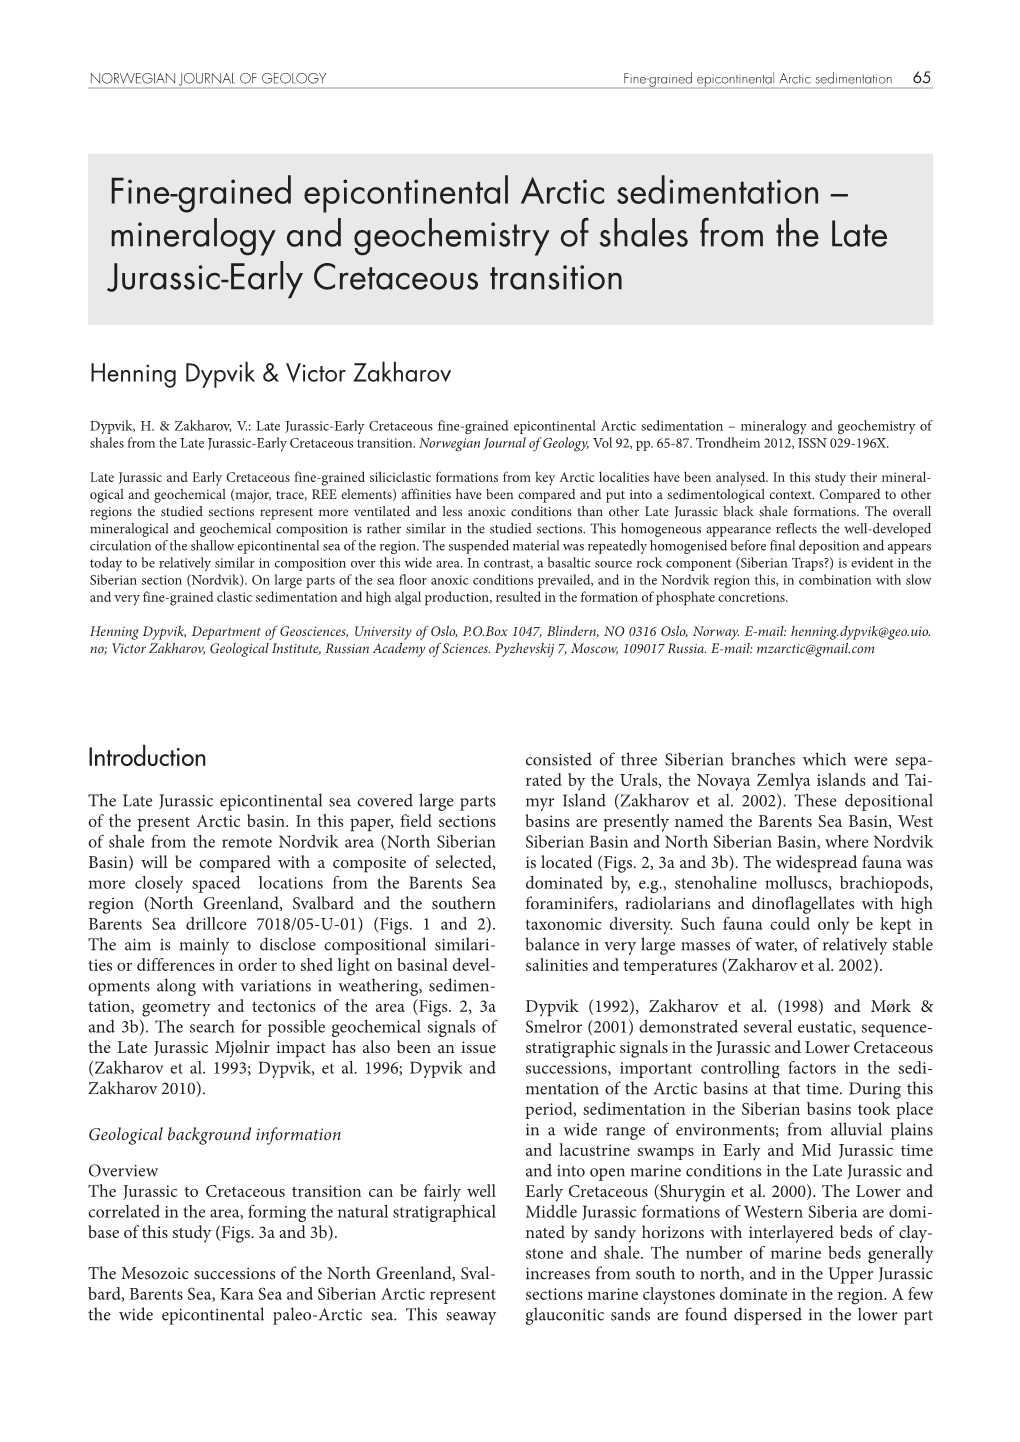 Mineralogy and Geochemistry of Shales from the Late Jurassic-Early Cretaceous Transition